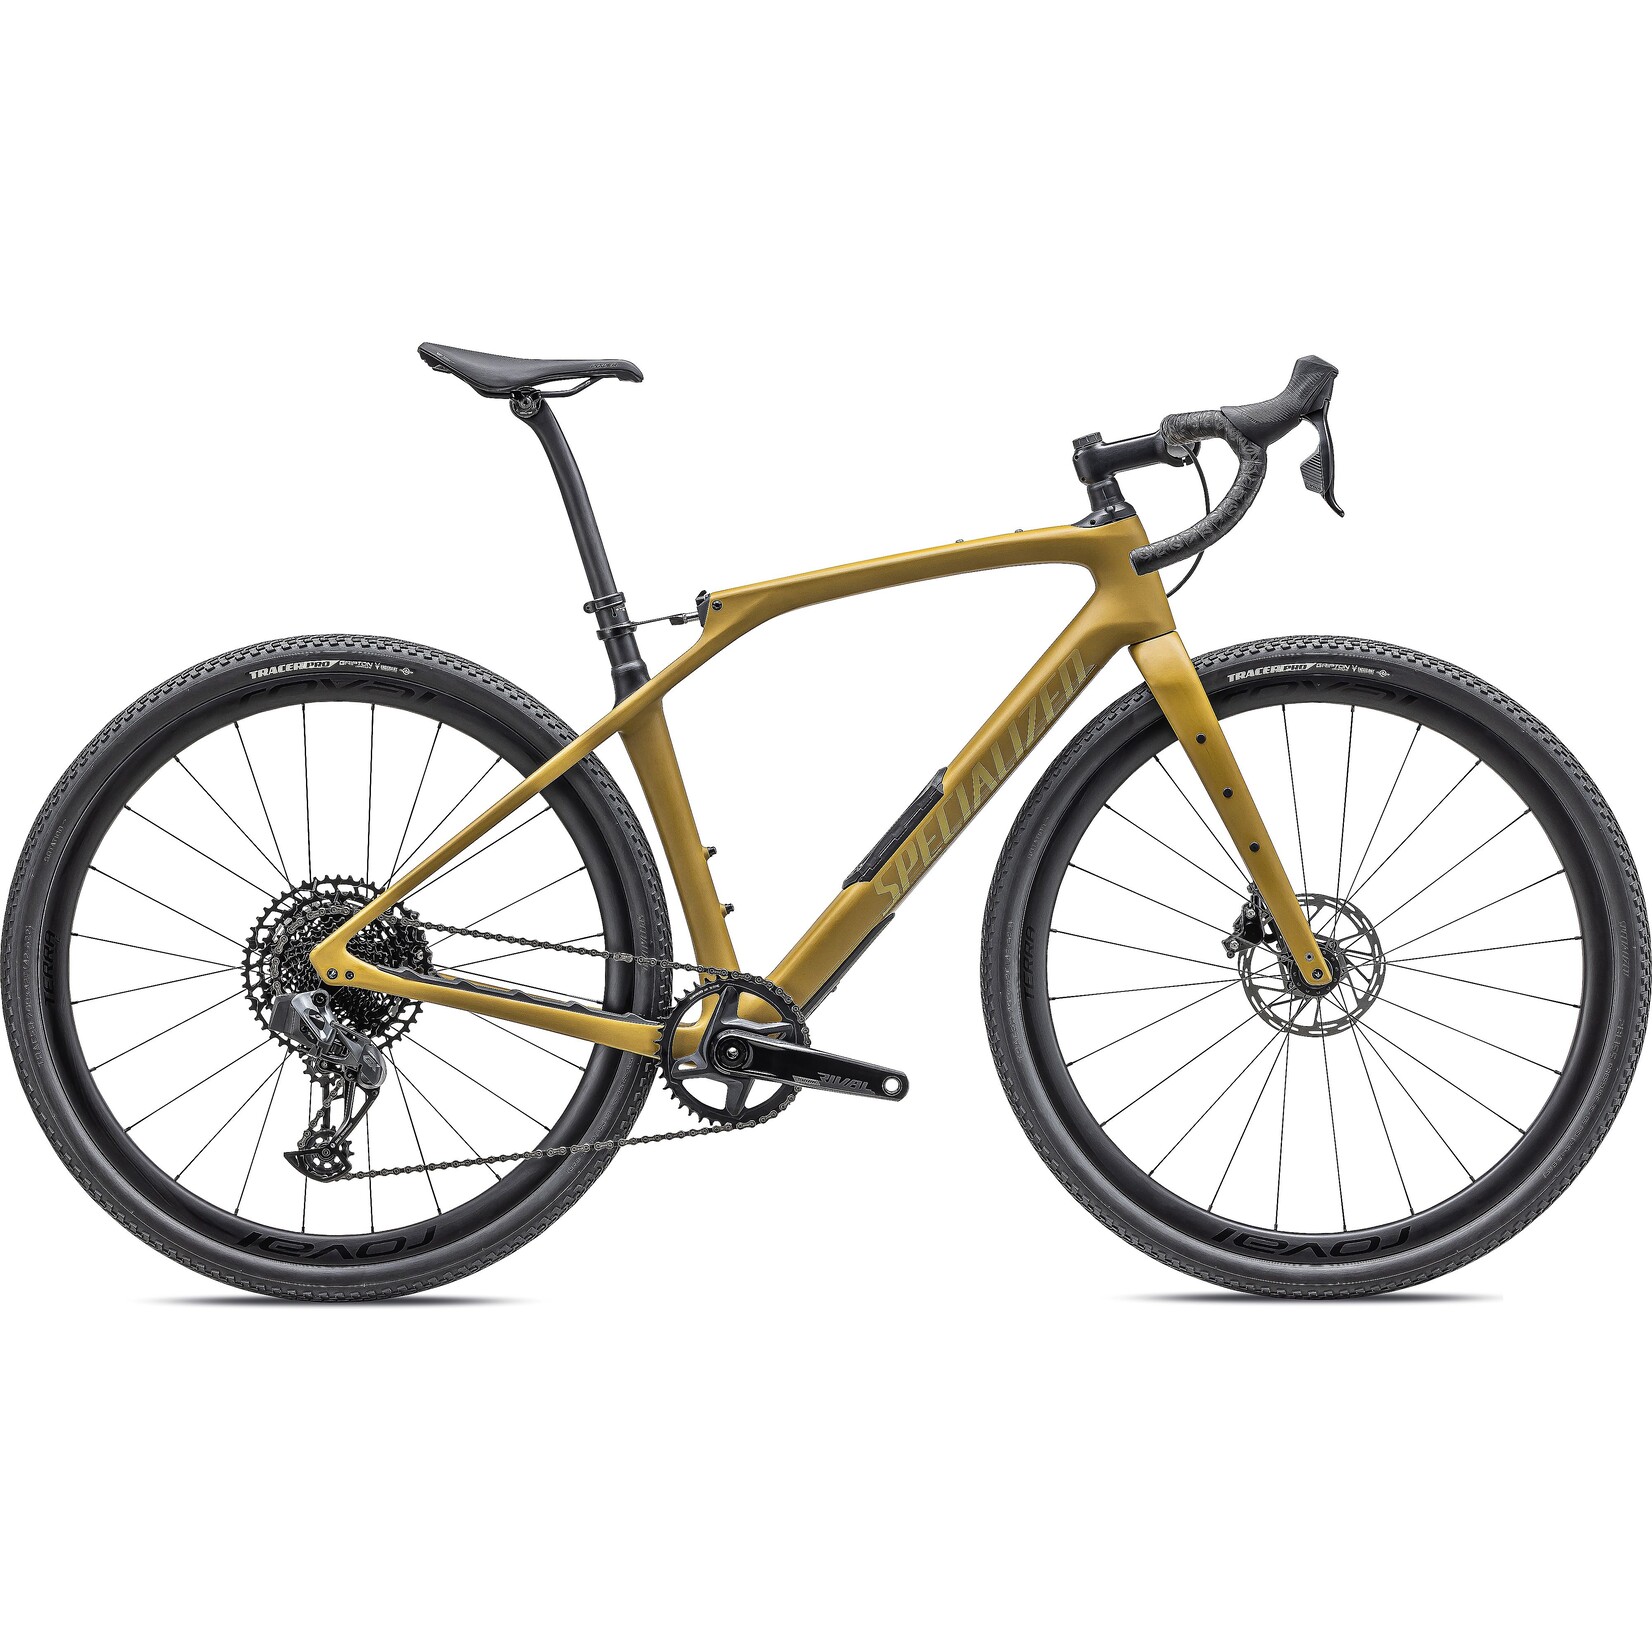 Specialized Diverge STR Expert in Satin Harvest Gold/Gold Ghost Pearl